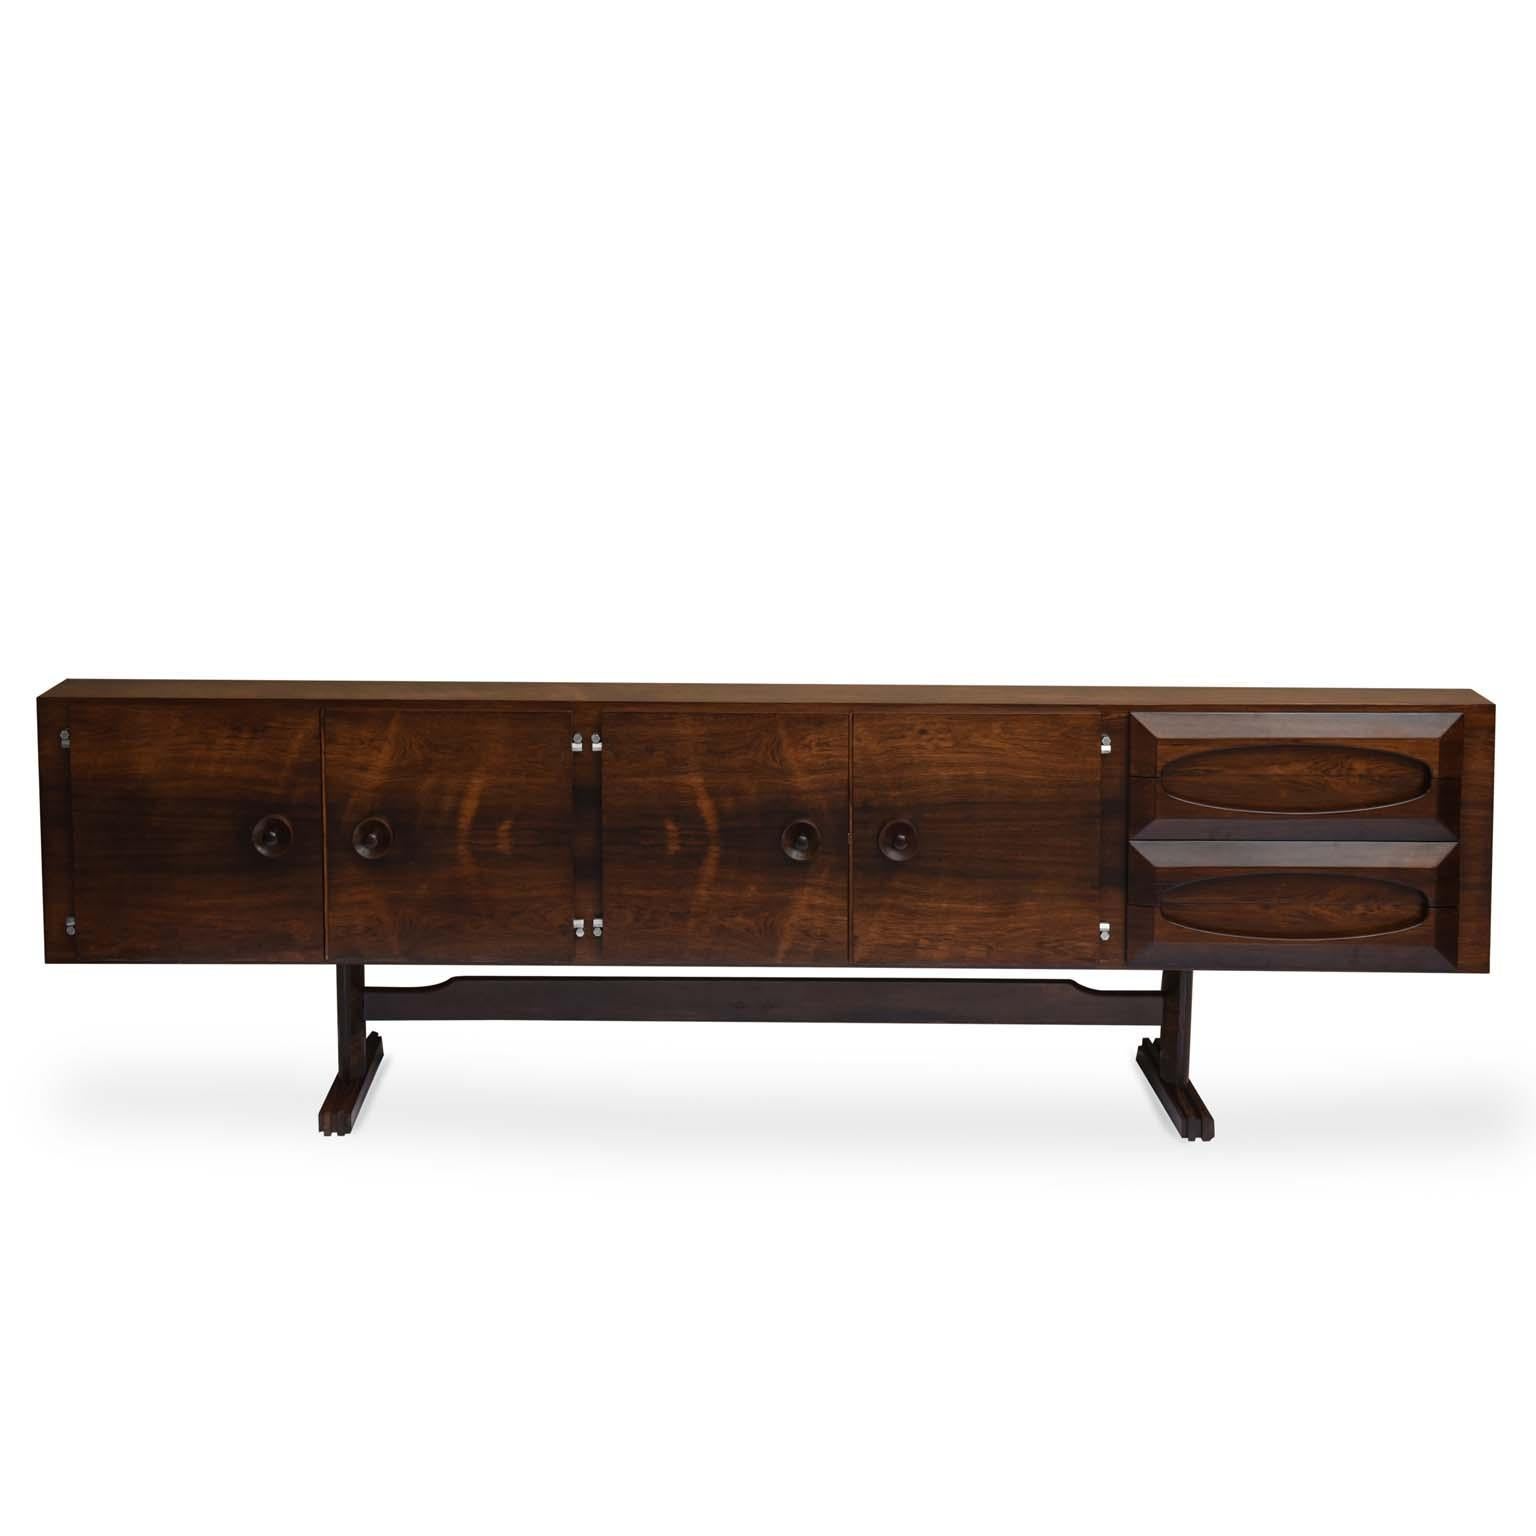 Novo Rumo midcentury Brazilian buffet with rosewood structure, 1960s

Beautiful rosewood buffet with four doors and four drawers.
There are 6 compartments behind the doors with ample storage. The detail of the drawer knobs is the highlight of the